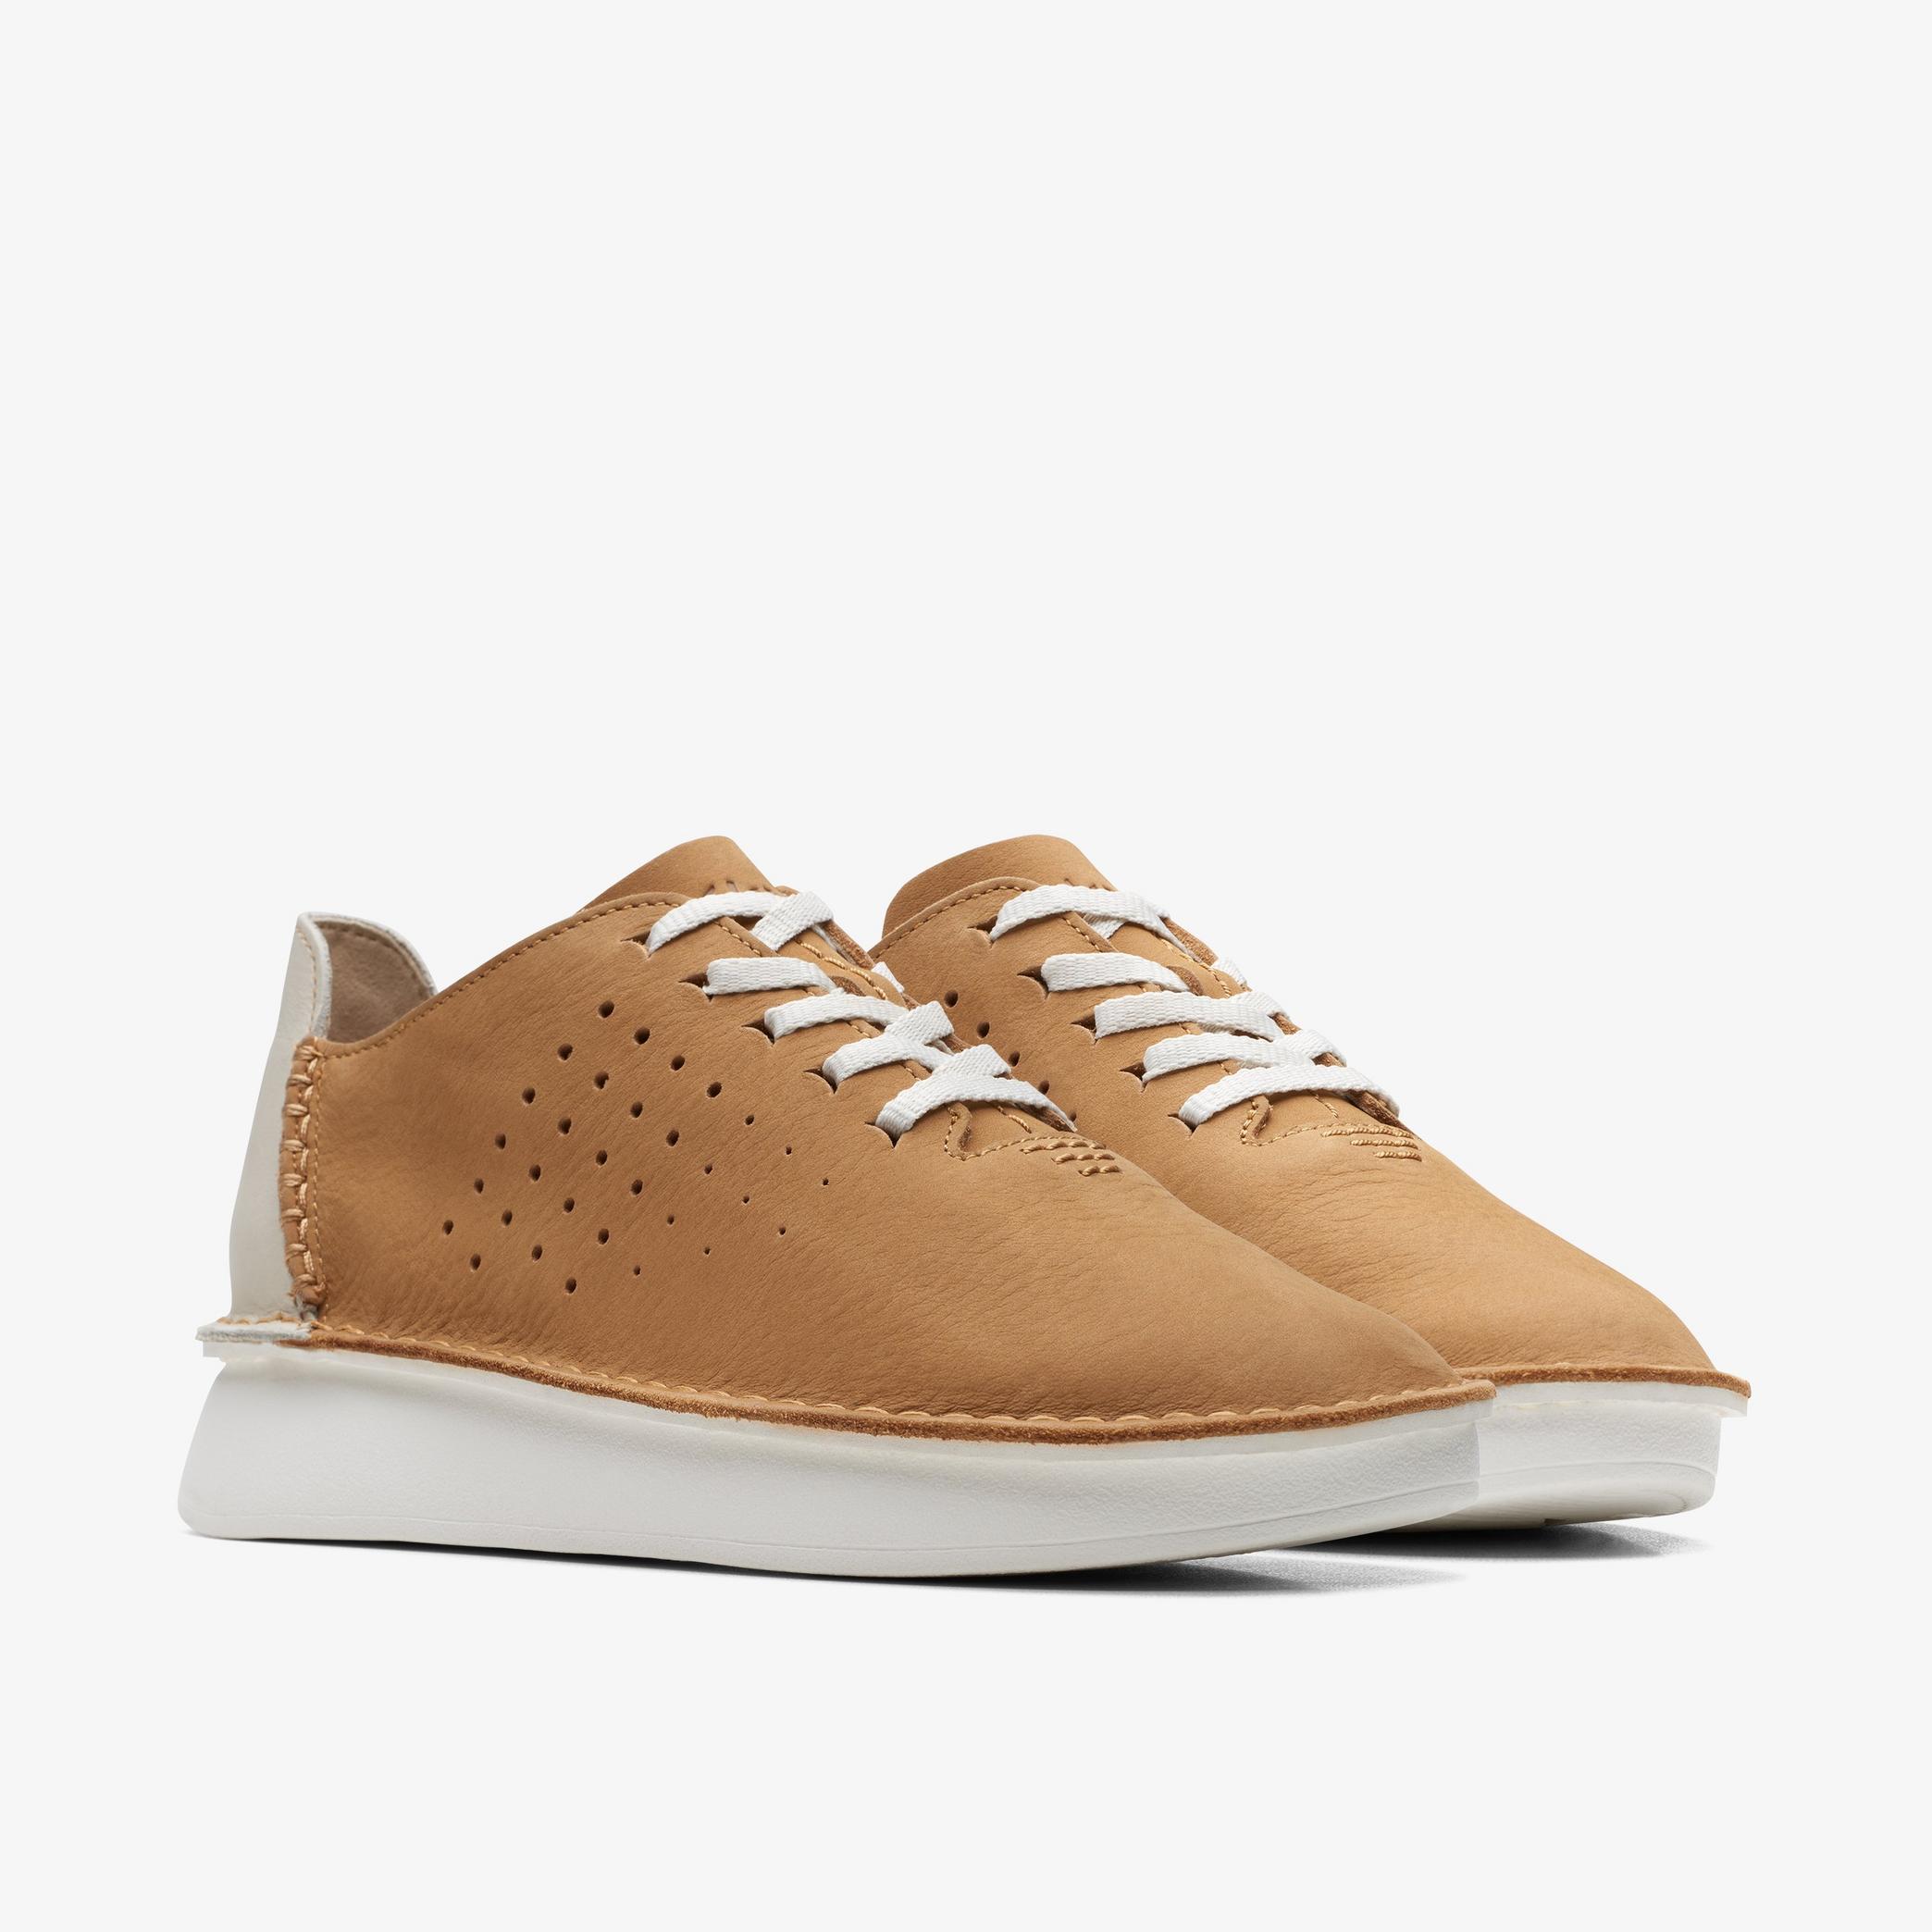 Velhill Etch Light Tan Combination Sneakers, view 4 of 6